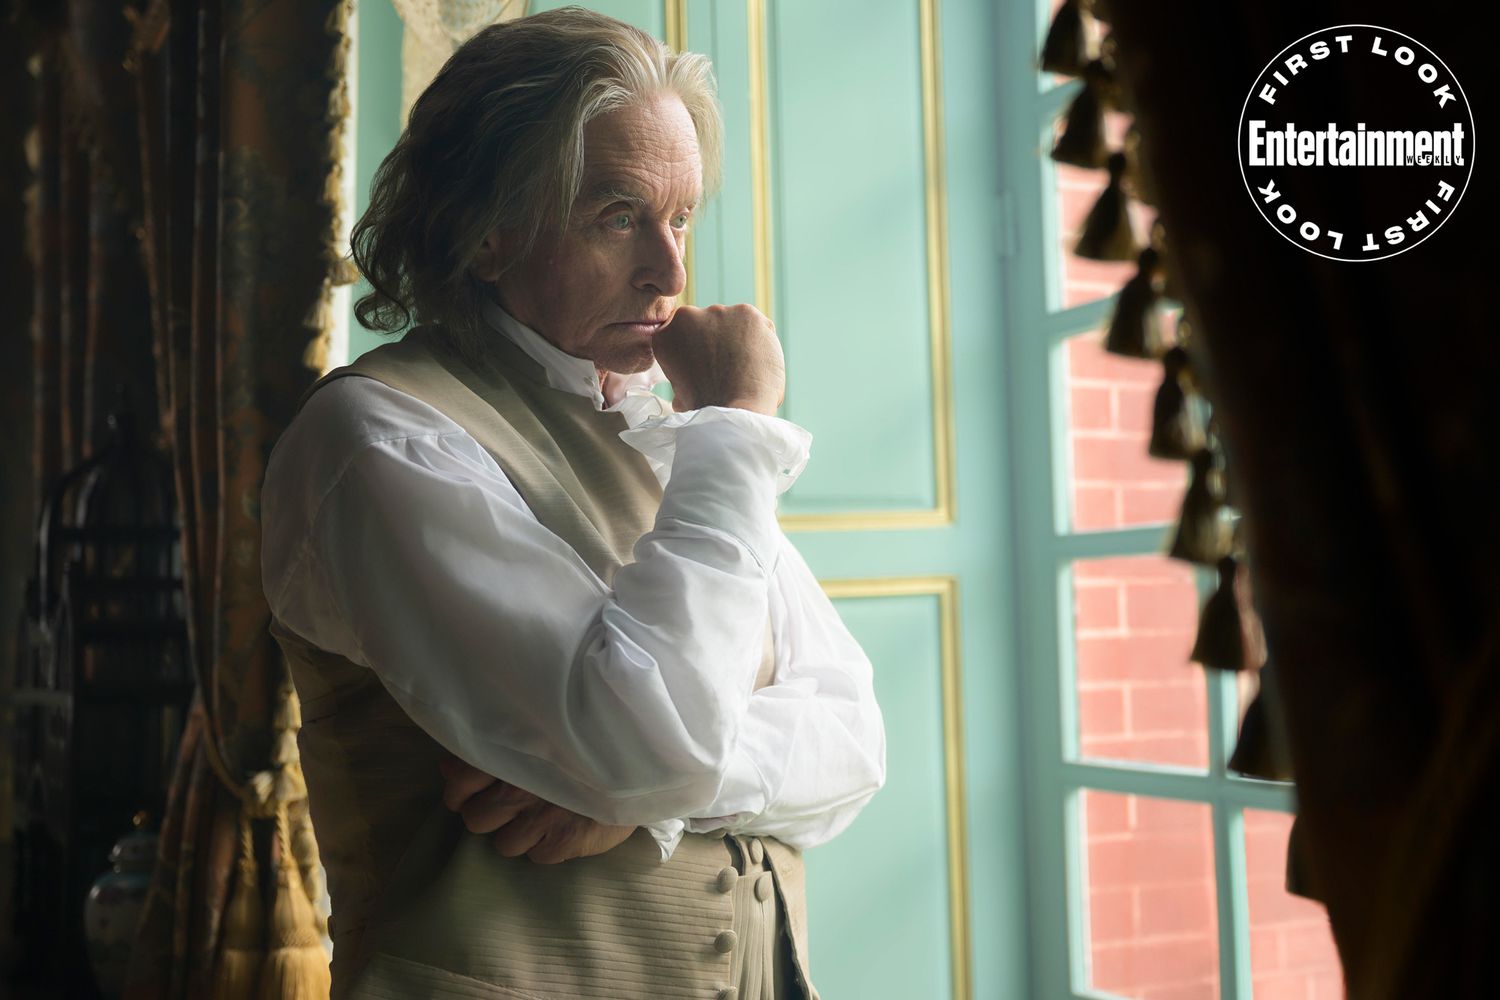 Michael Douglas finds his inner Founding Father in first look at Ben Franklin Apple TV+ series